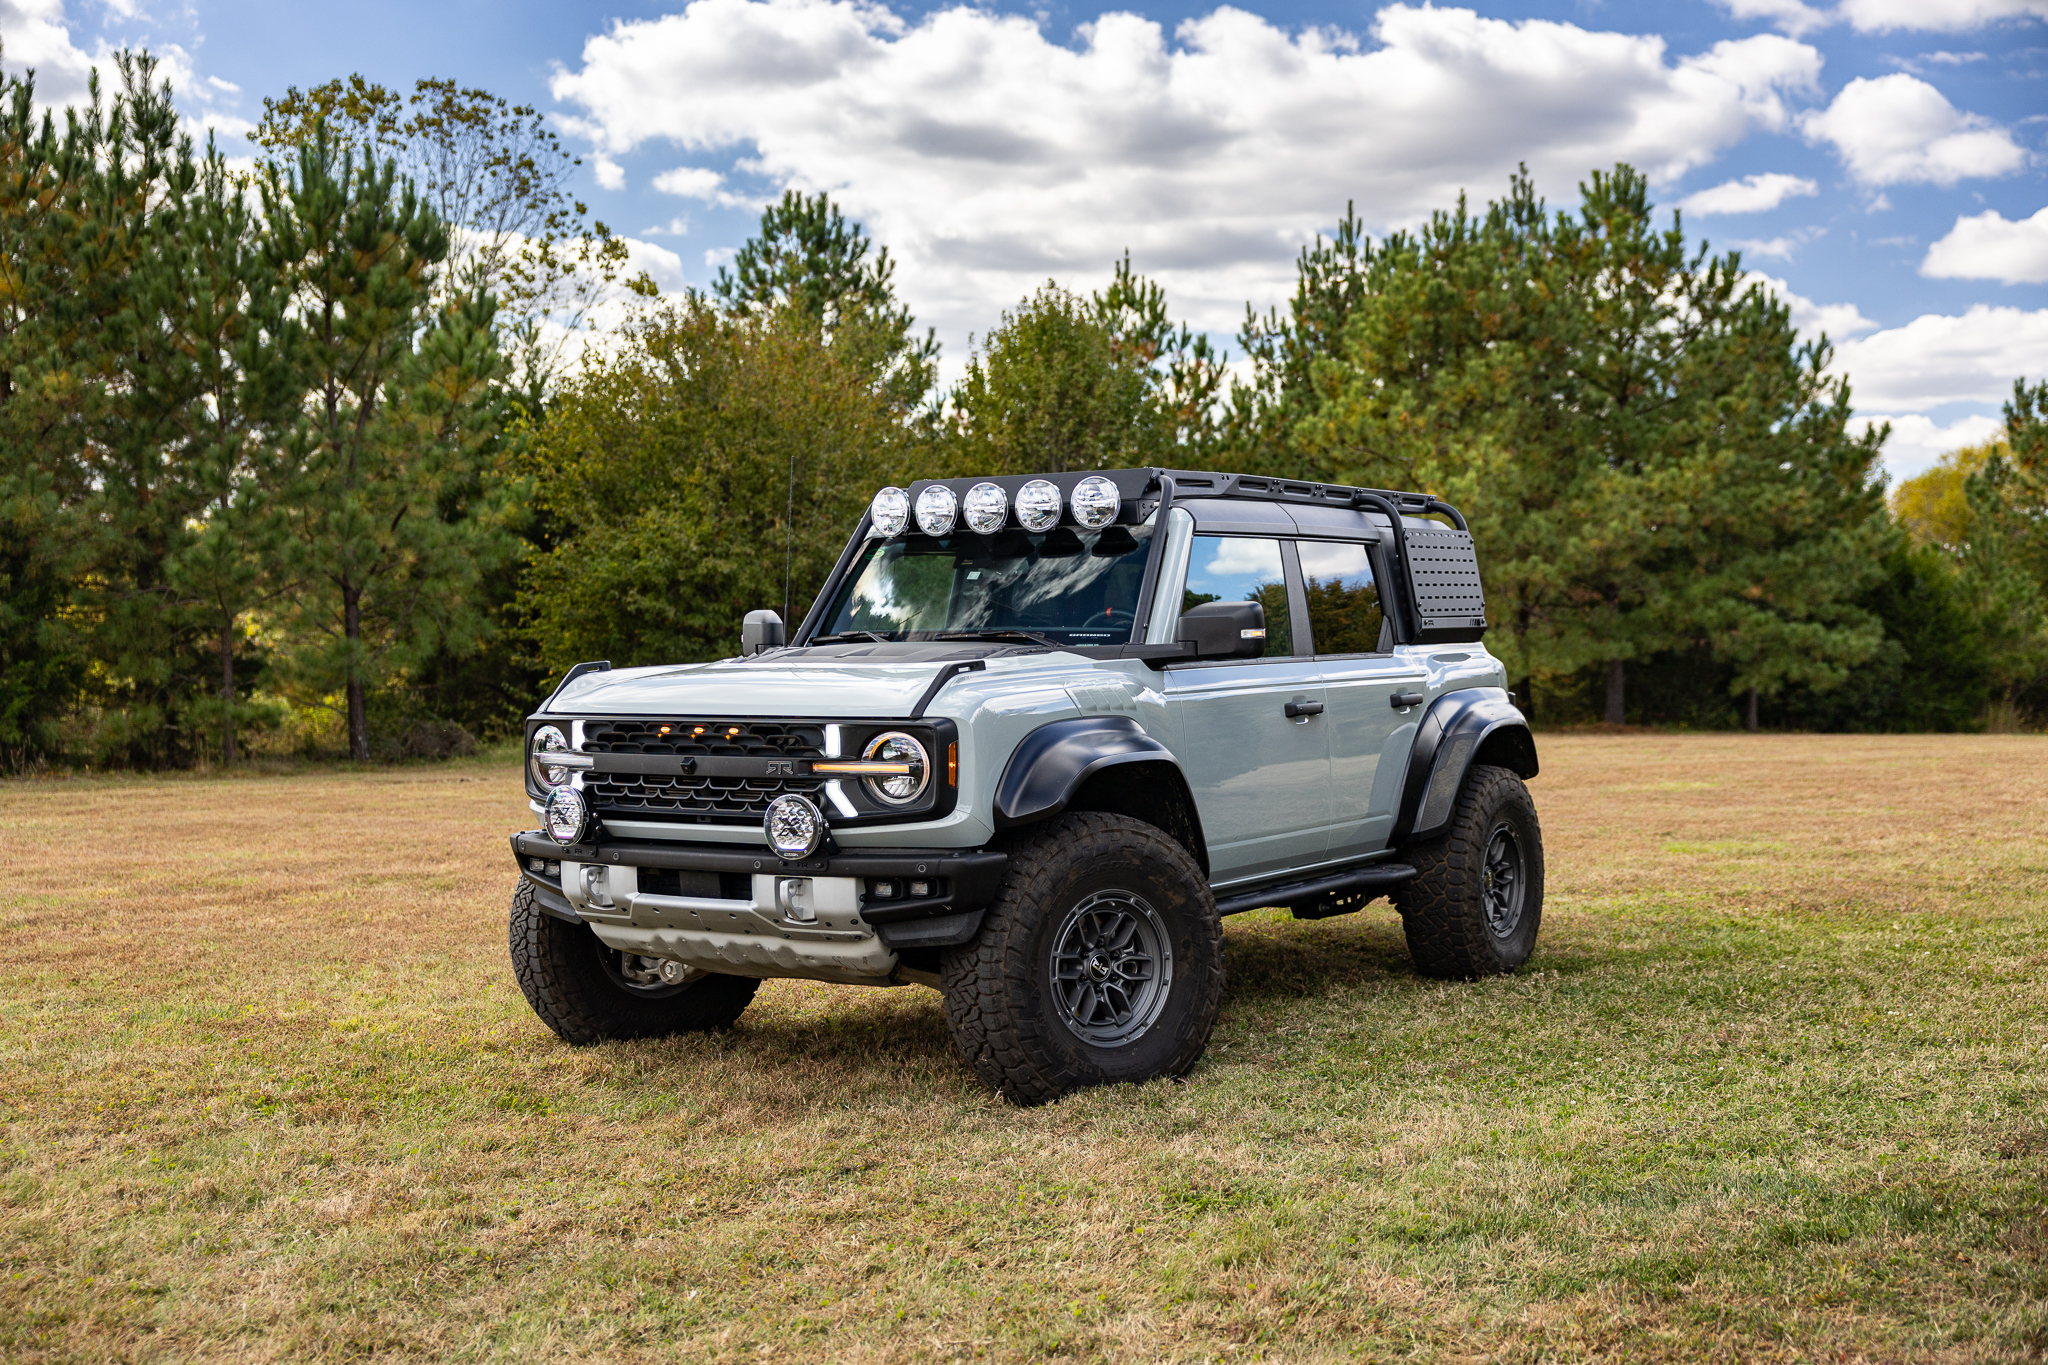 Ford Bronco Modular Roof Rack for 4-door, hard or soft top, Ford Bronco from RTR Vehicles! JCOL9126-2